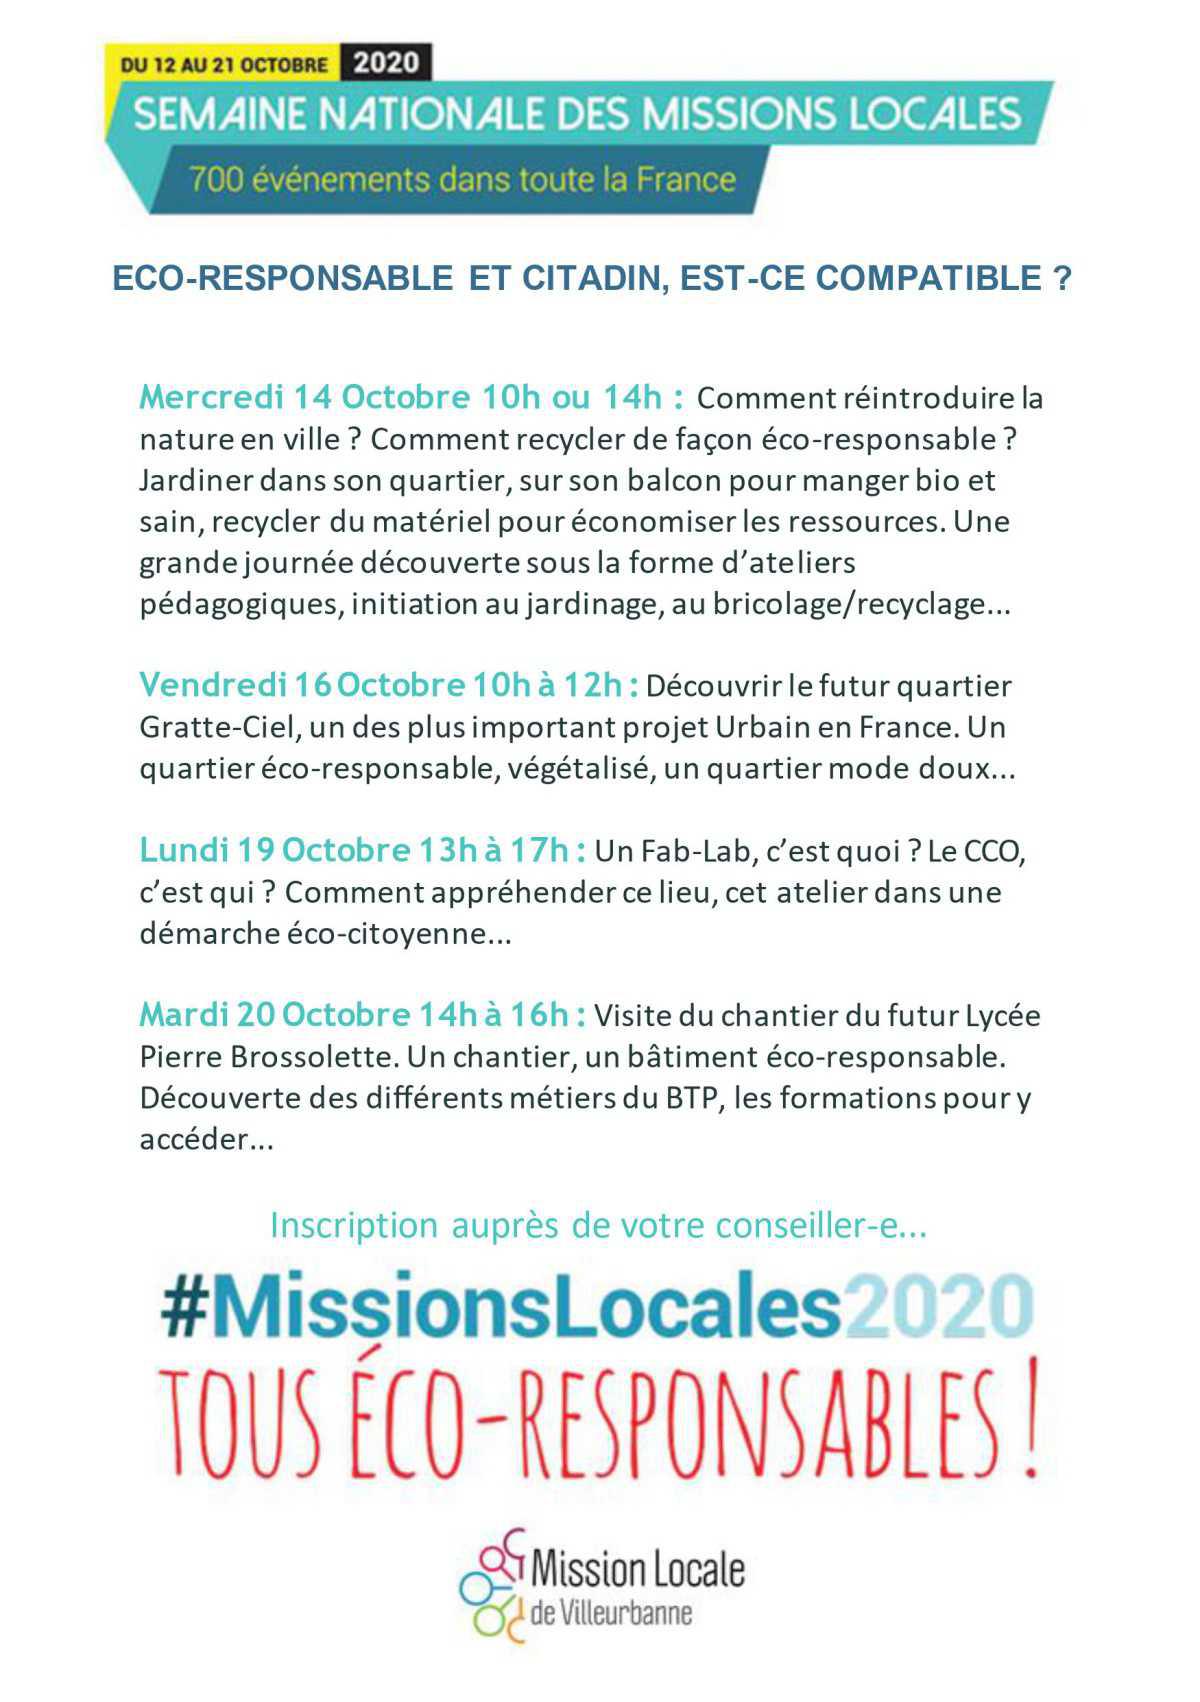 Semaine des Missions Locales - #MissionsLocales2020